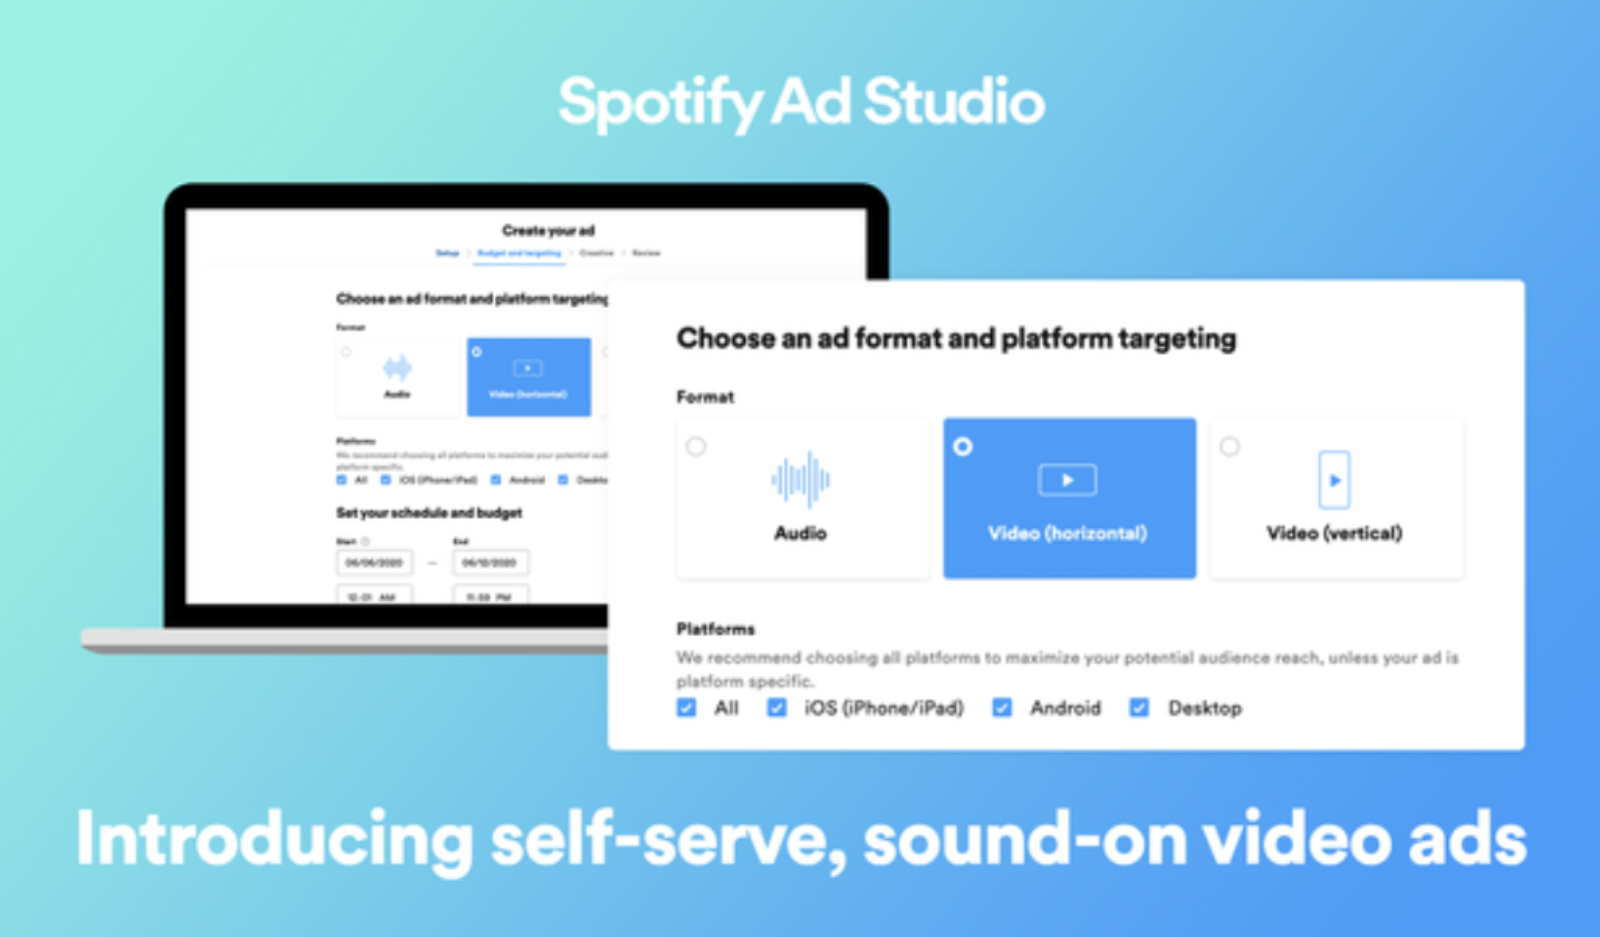 Making Video Campaigns on Spotify Is Now Easy with Sound-On Video Ads!